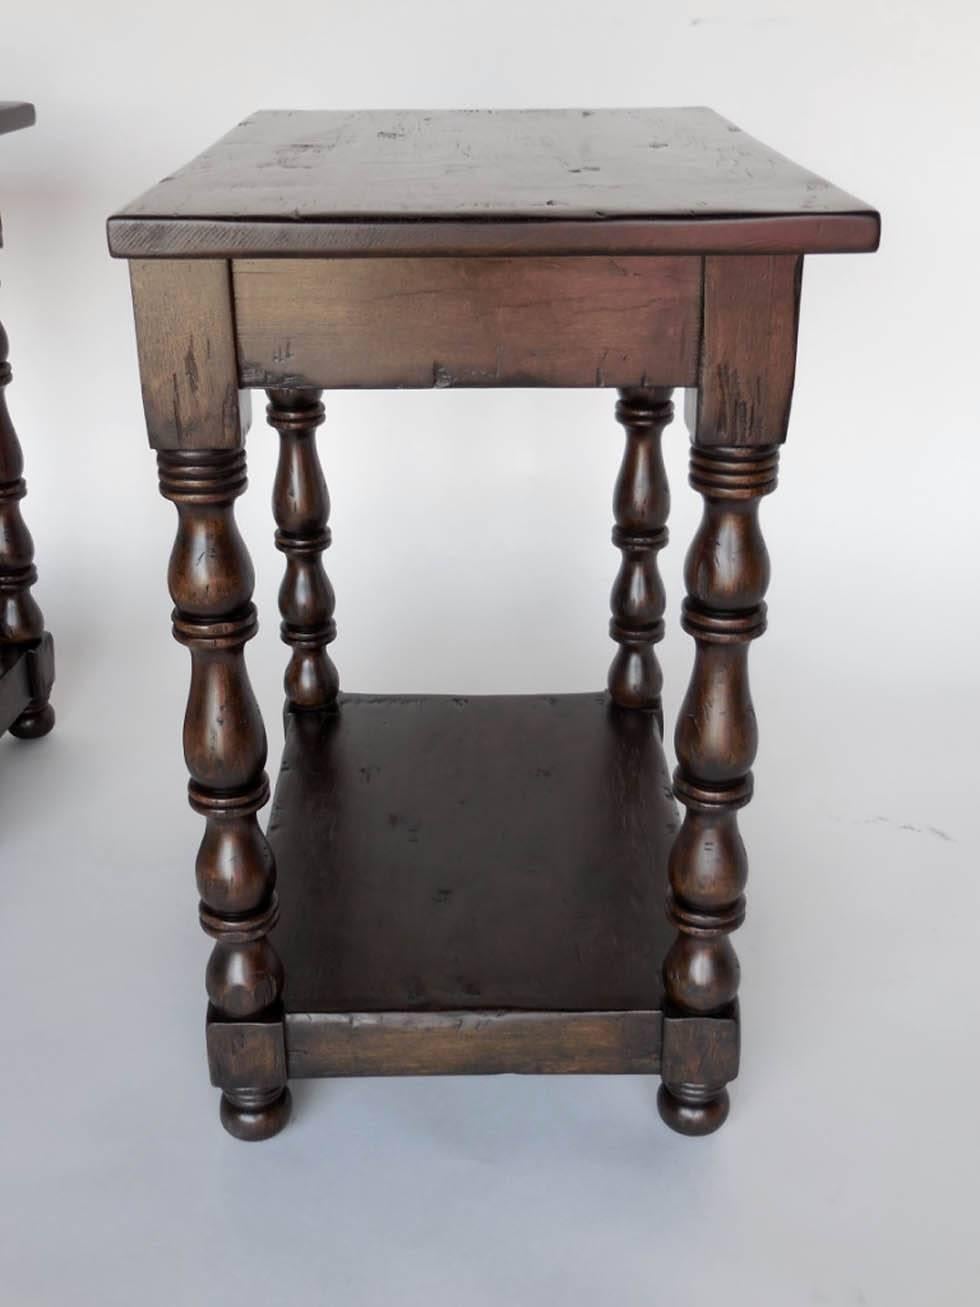 Spanish Colonial Dos Gallos Custom Side Tables/Nightstands with Turned Legs, Drawer and Shelv For Sale